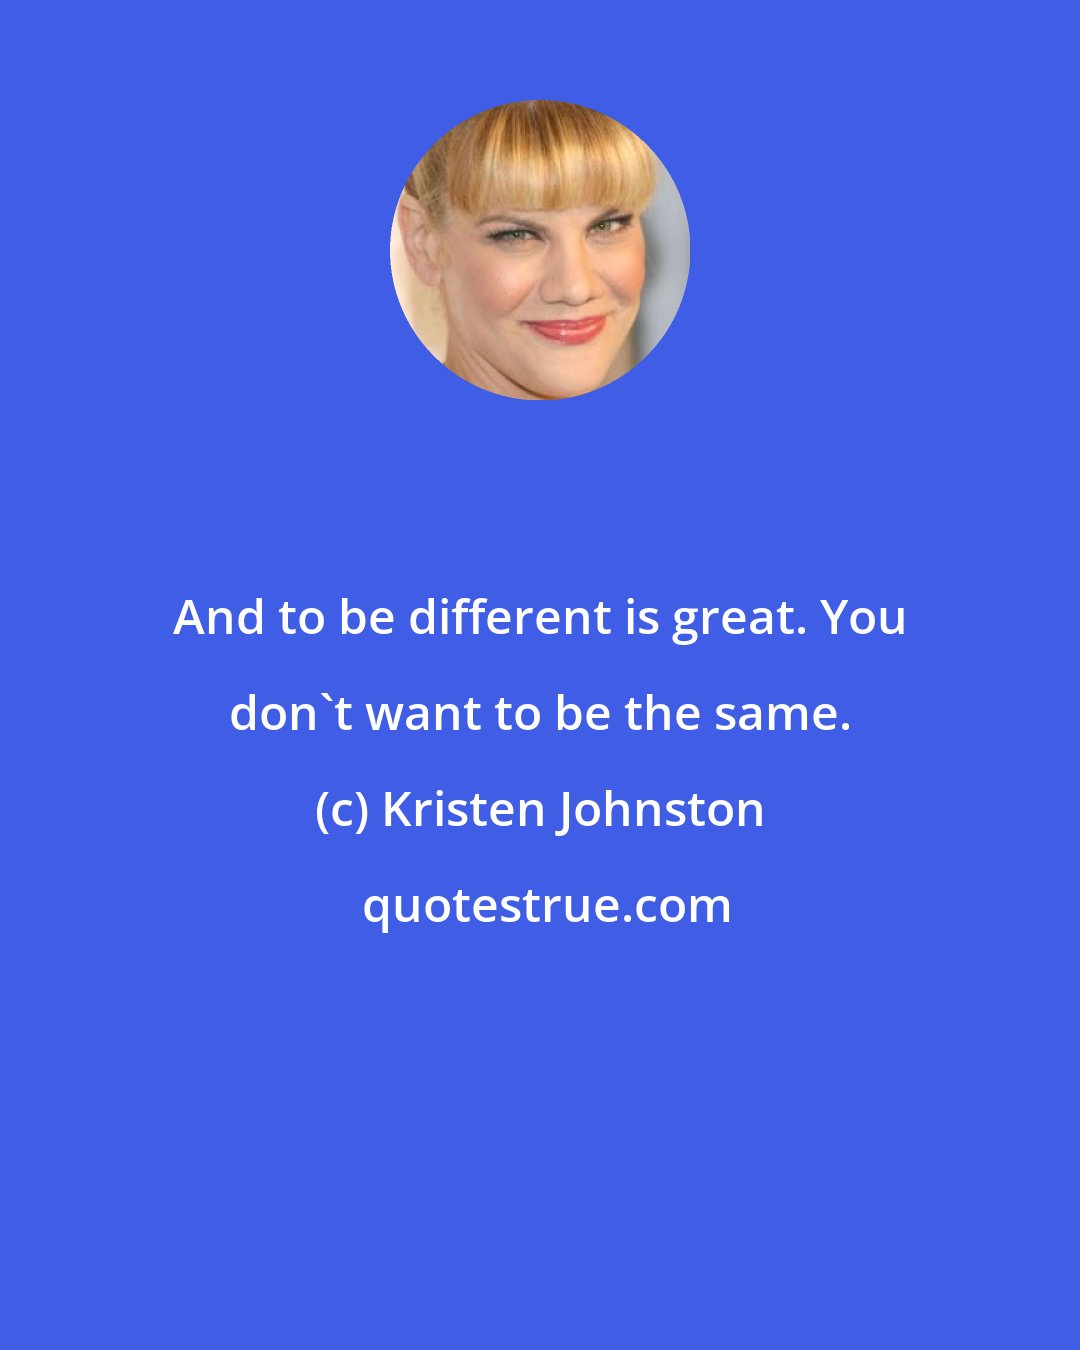 Kristen Johnston: And to be different is great. You don't want to be the same.